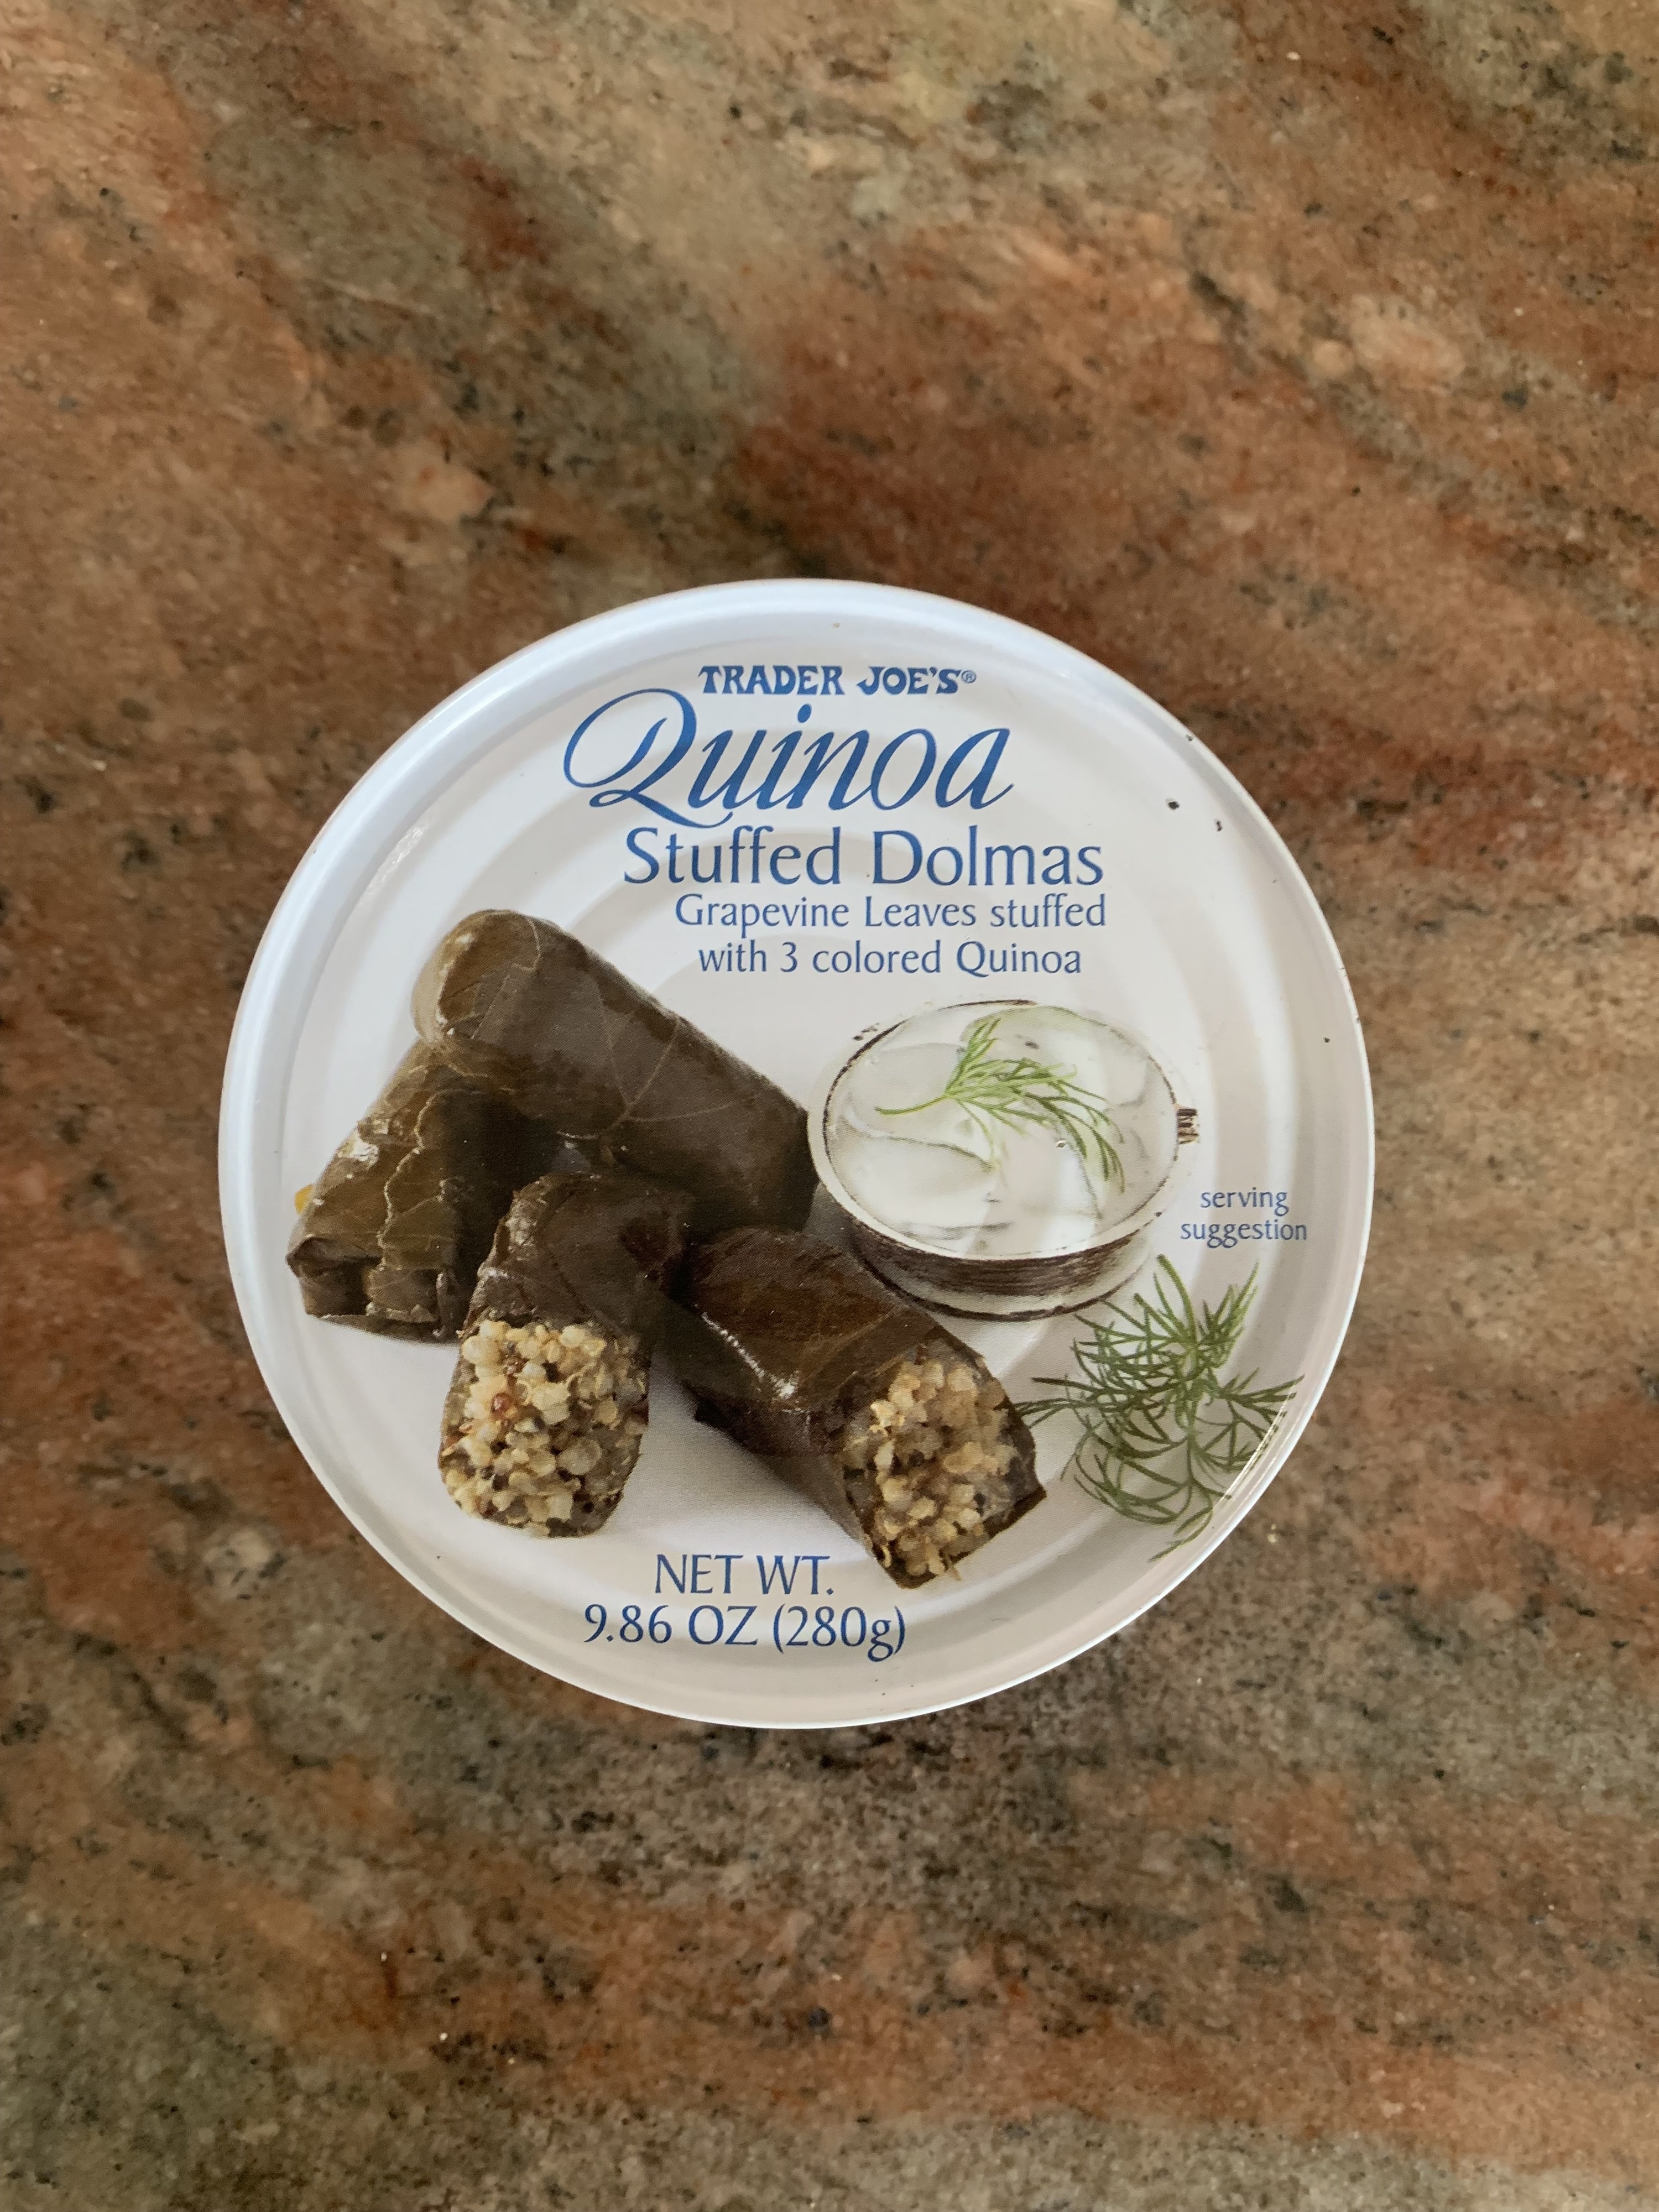 A can of the dolmas on the counter